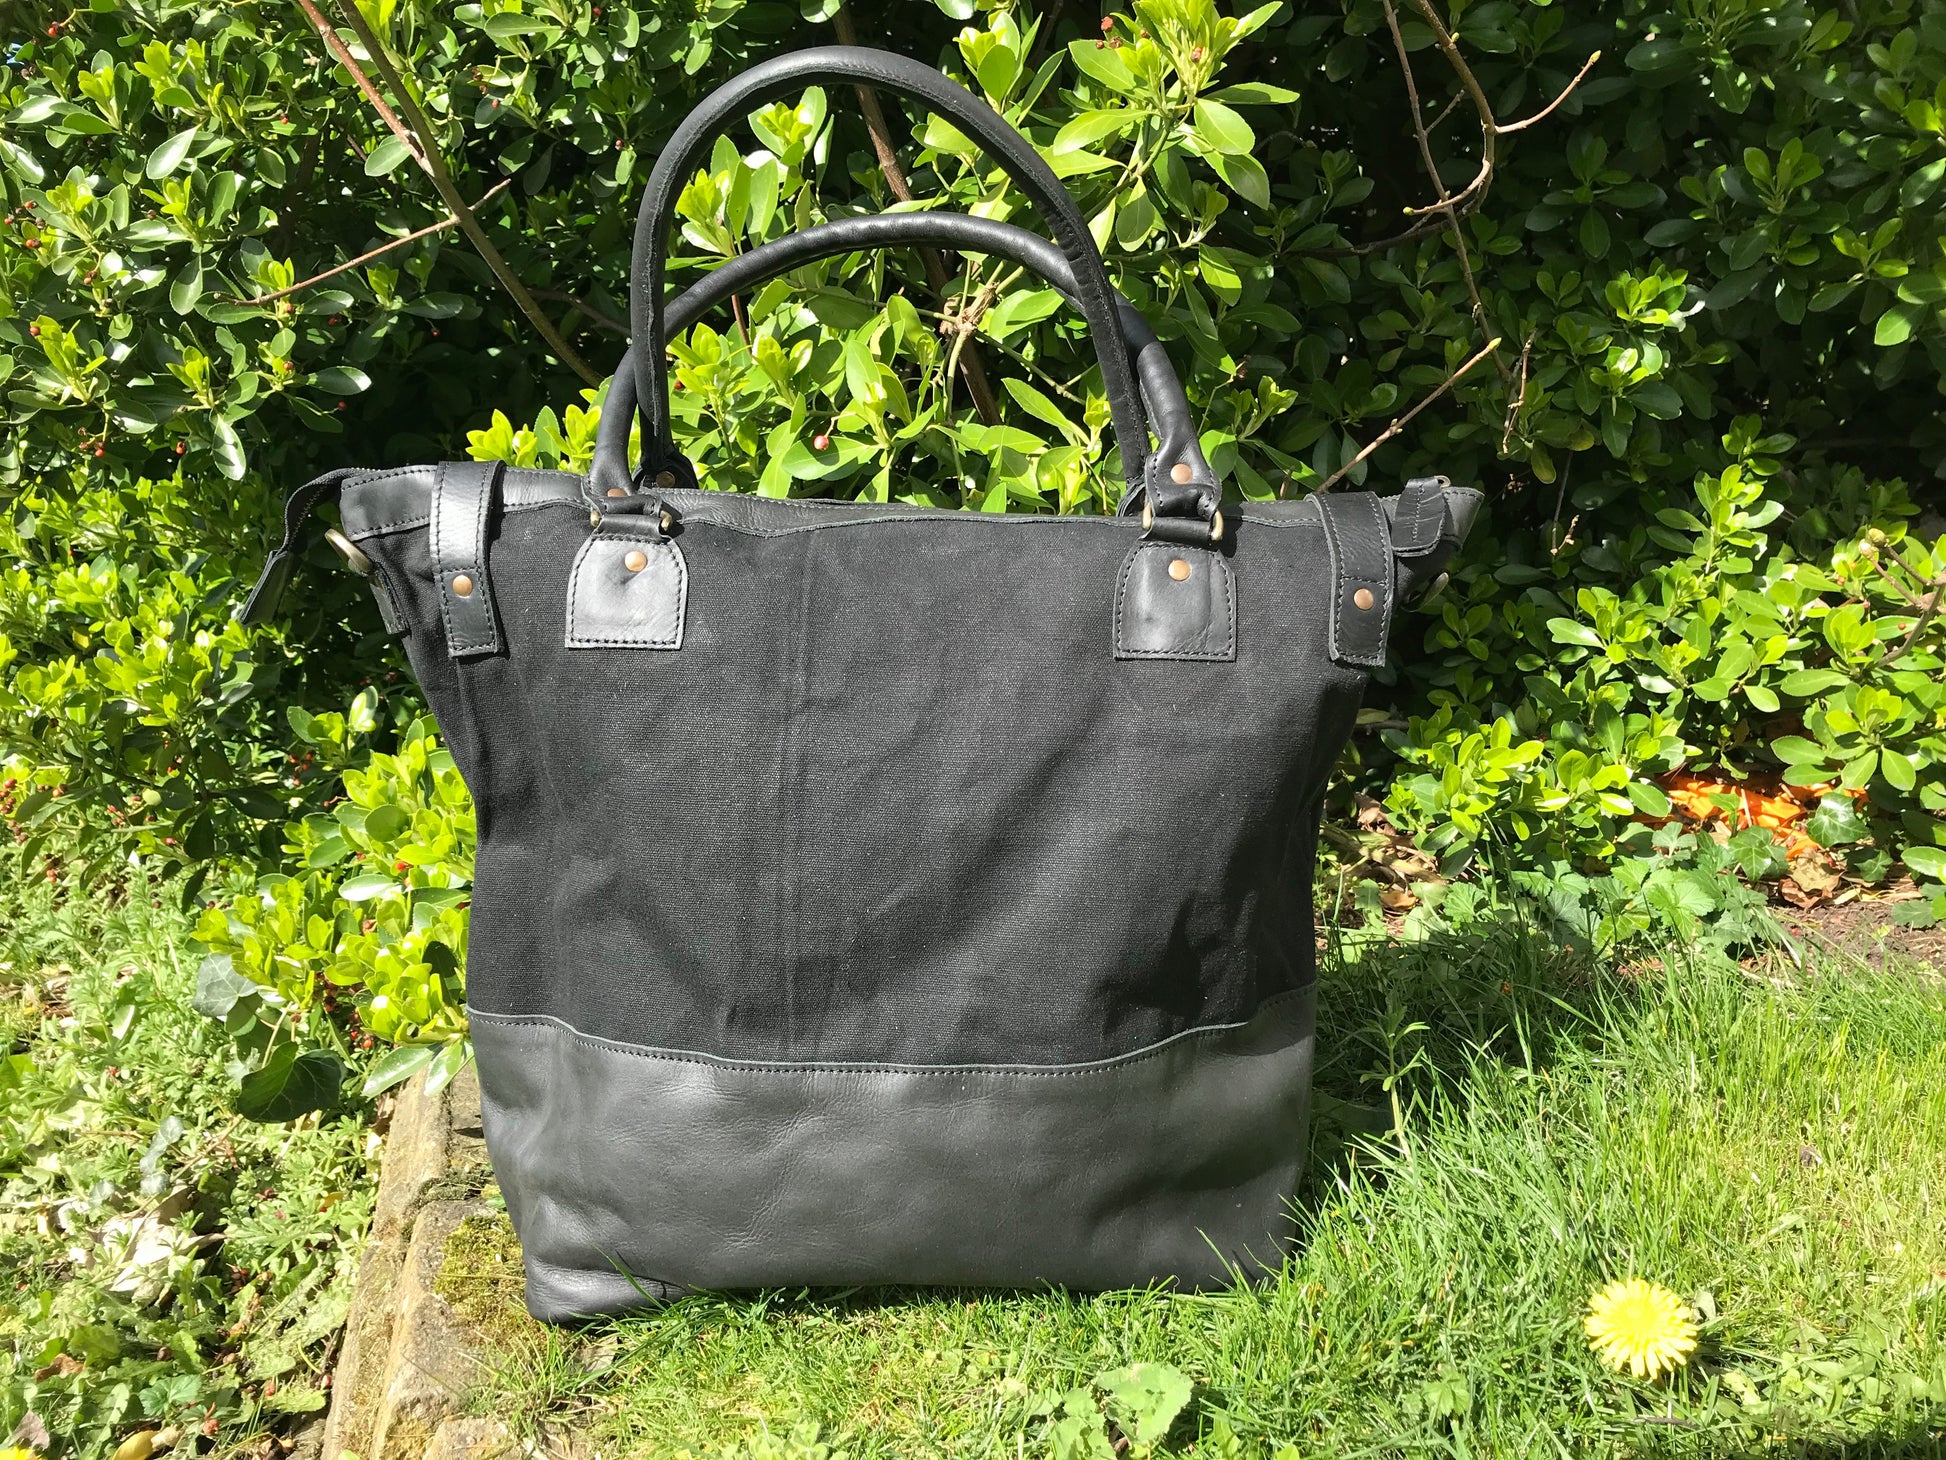 The Bingham.  A classic zipped tote bag by Burghley Bags.  Handmade from eco-friendly vegetable tanned leather and strong cotton canvas, with a leather shoulder strap.  Shown in elegant black.